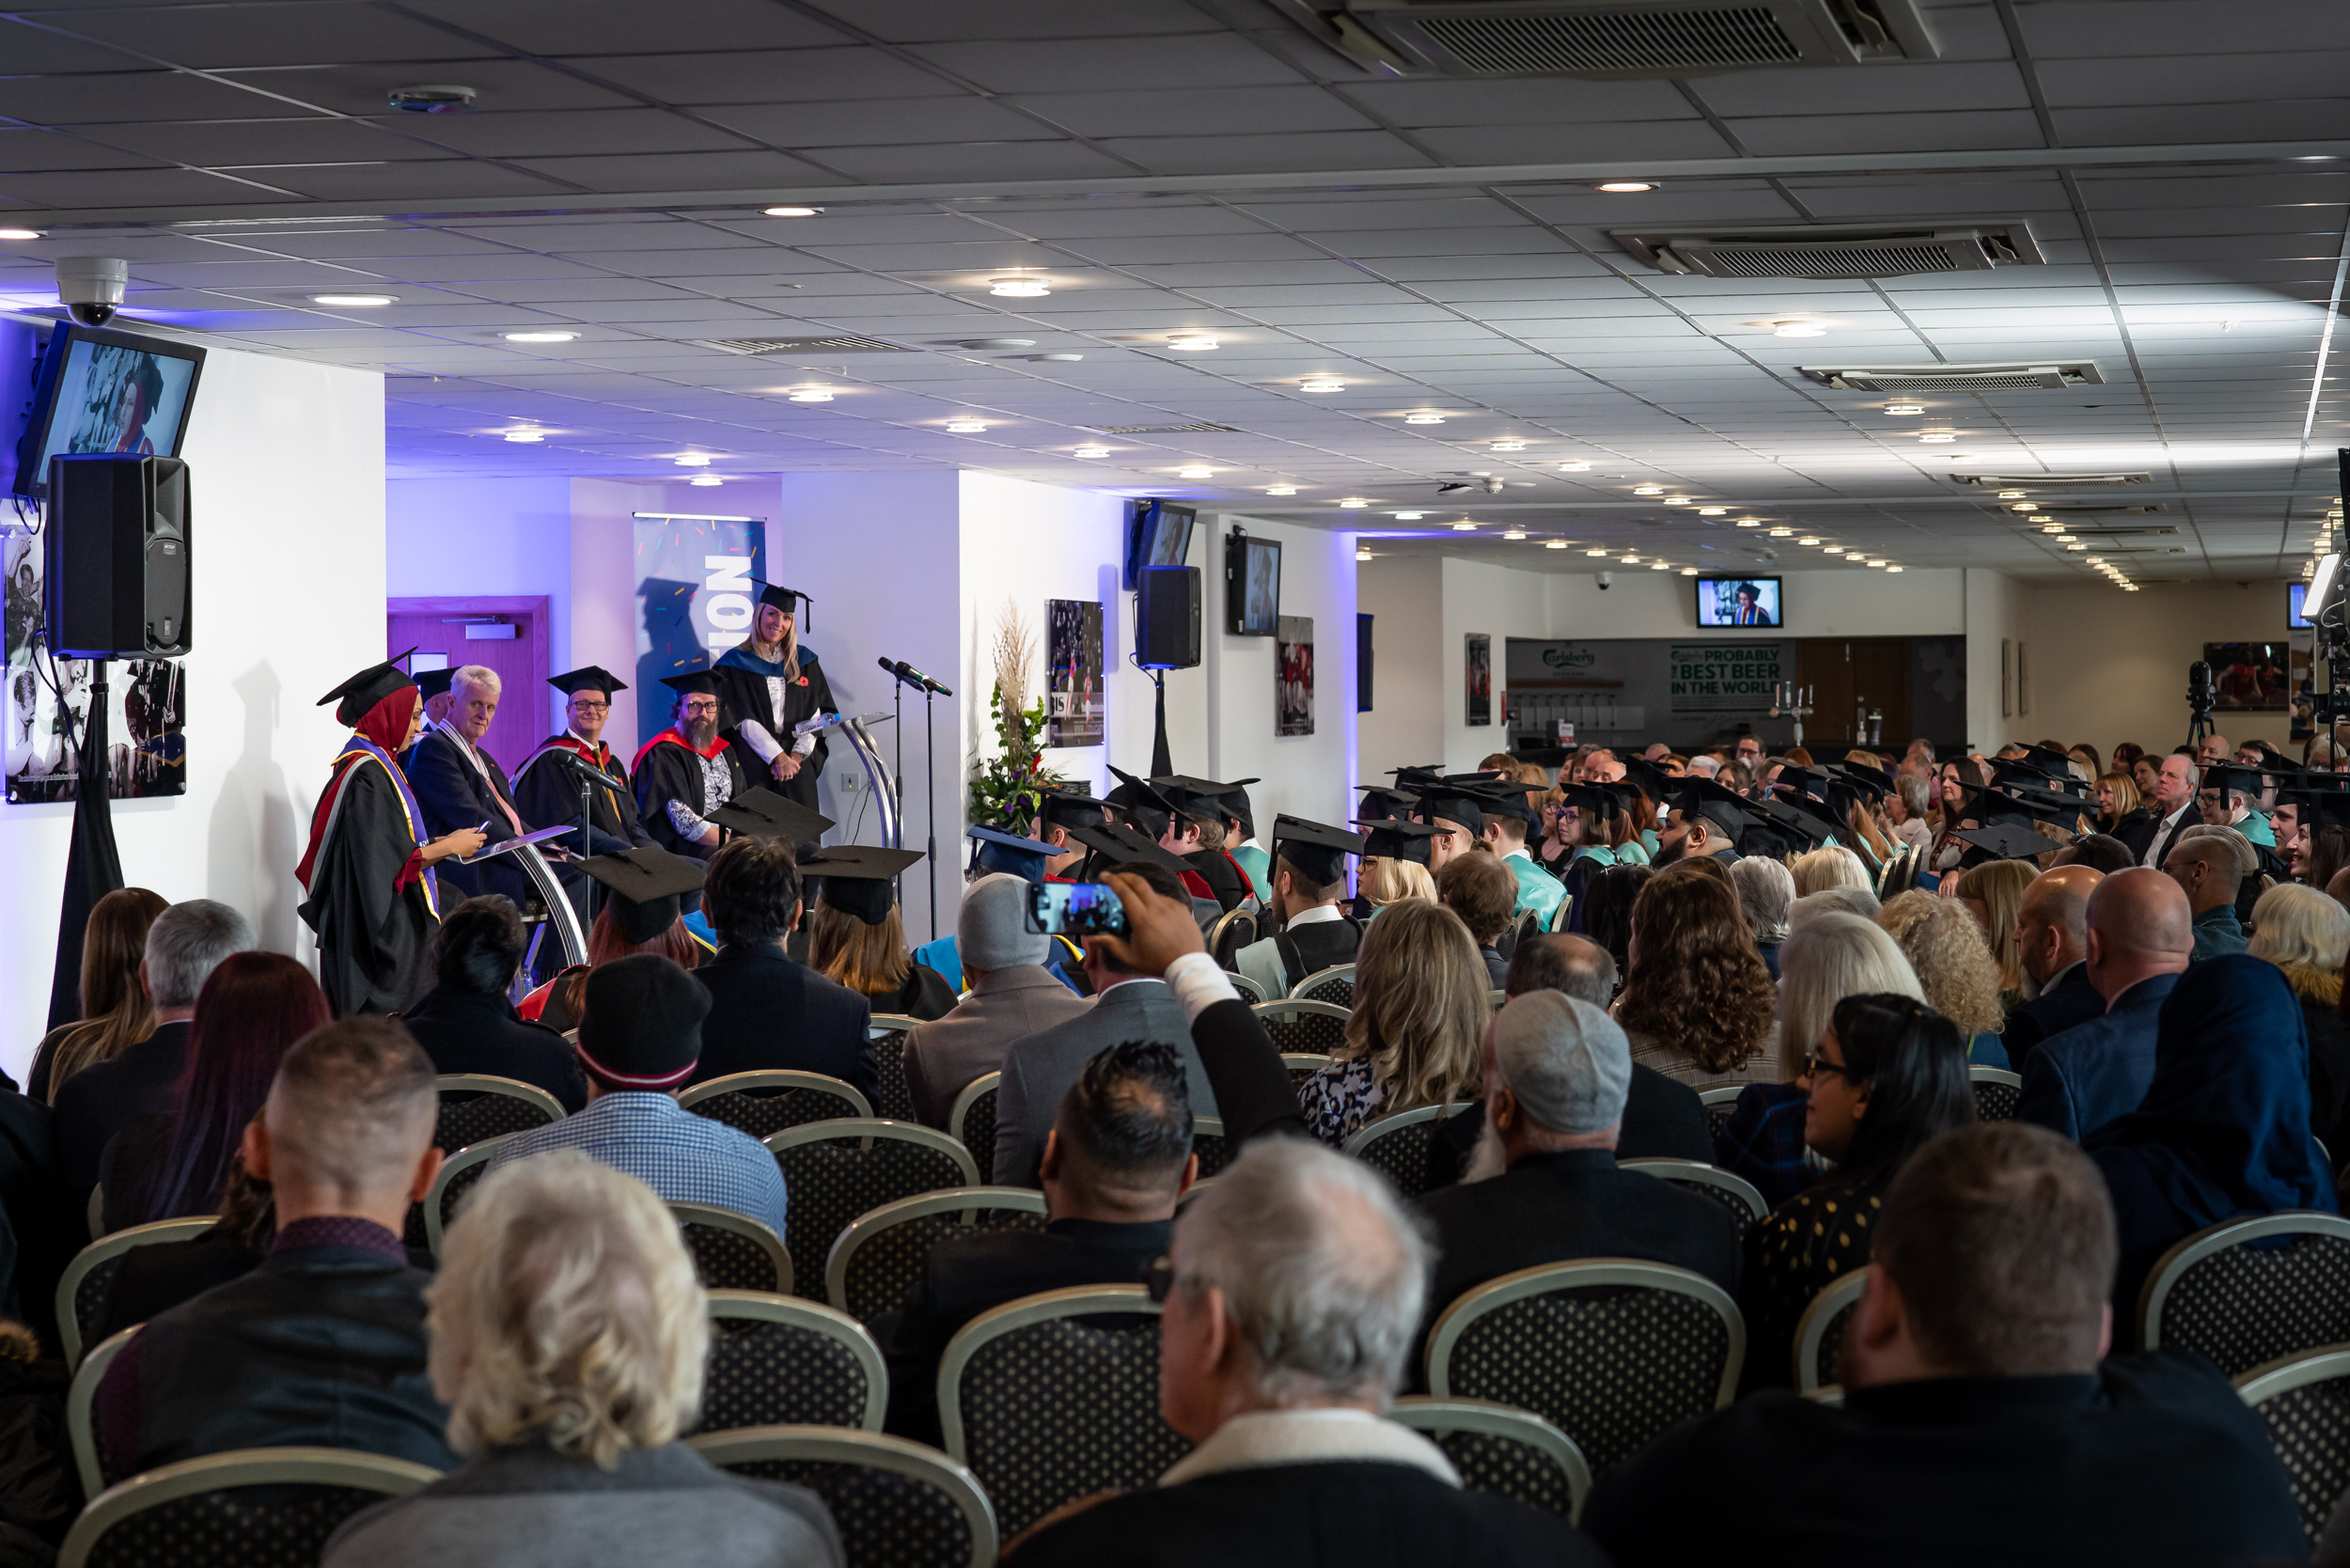 RNN Group to hold Higher Education graduation ceremony at the New York Stadium for the second year running